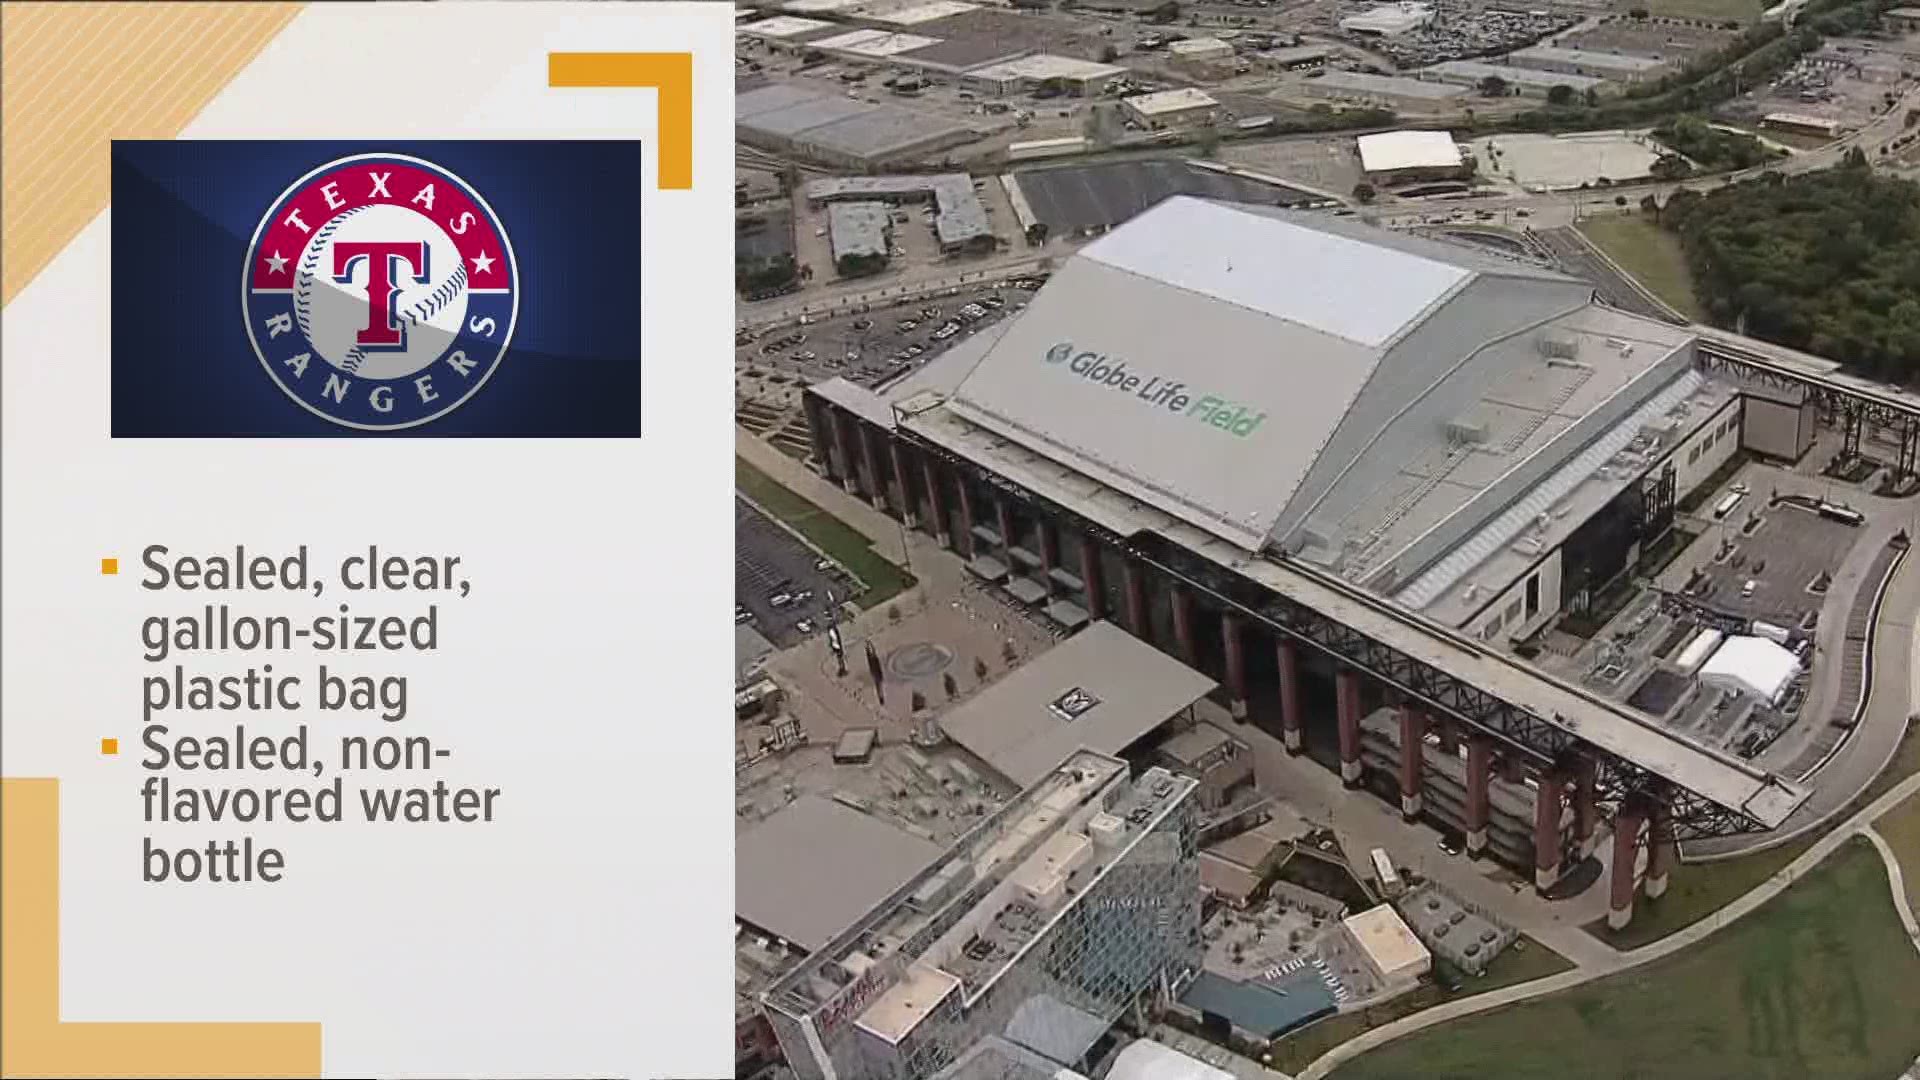 Texas Rangers expect 100% capacity on Opening Day at Globe Life Field